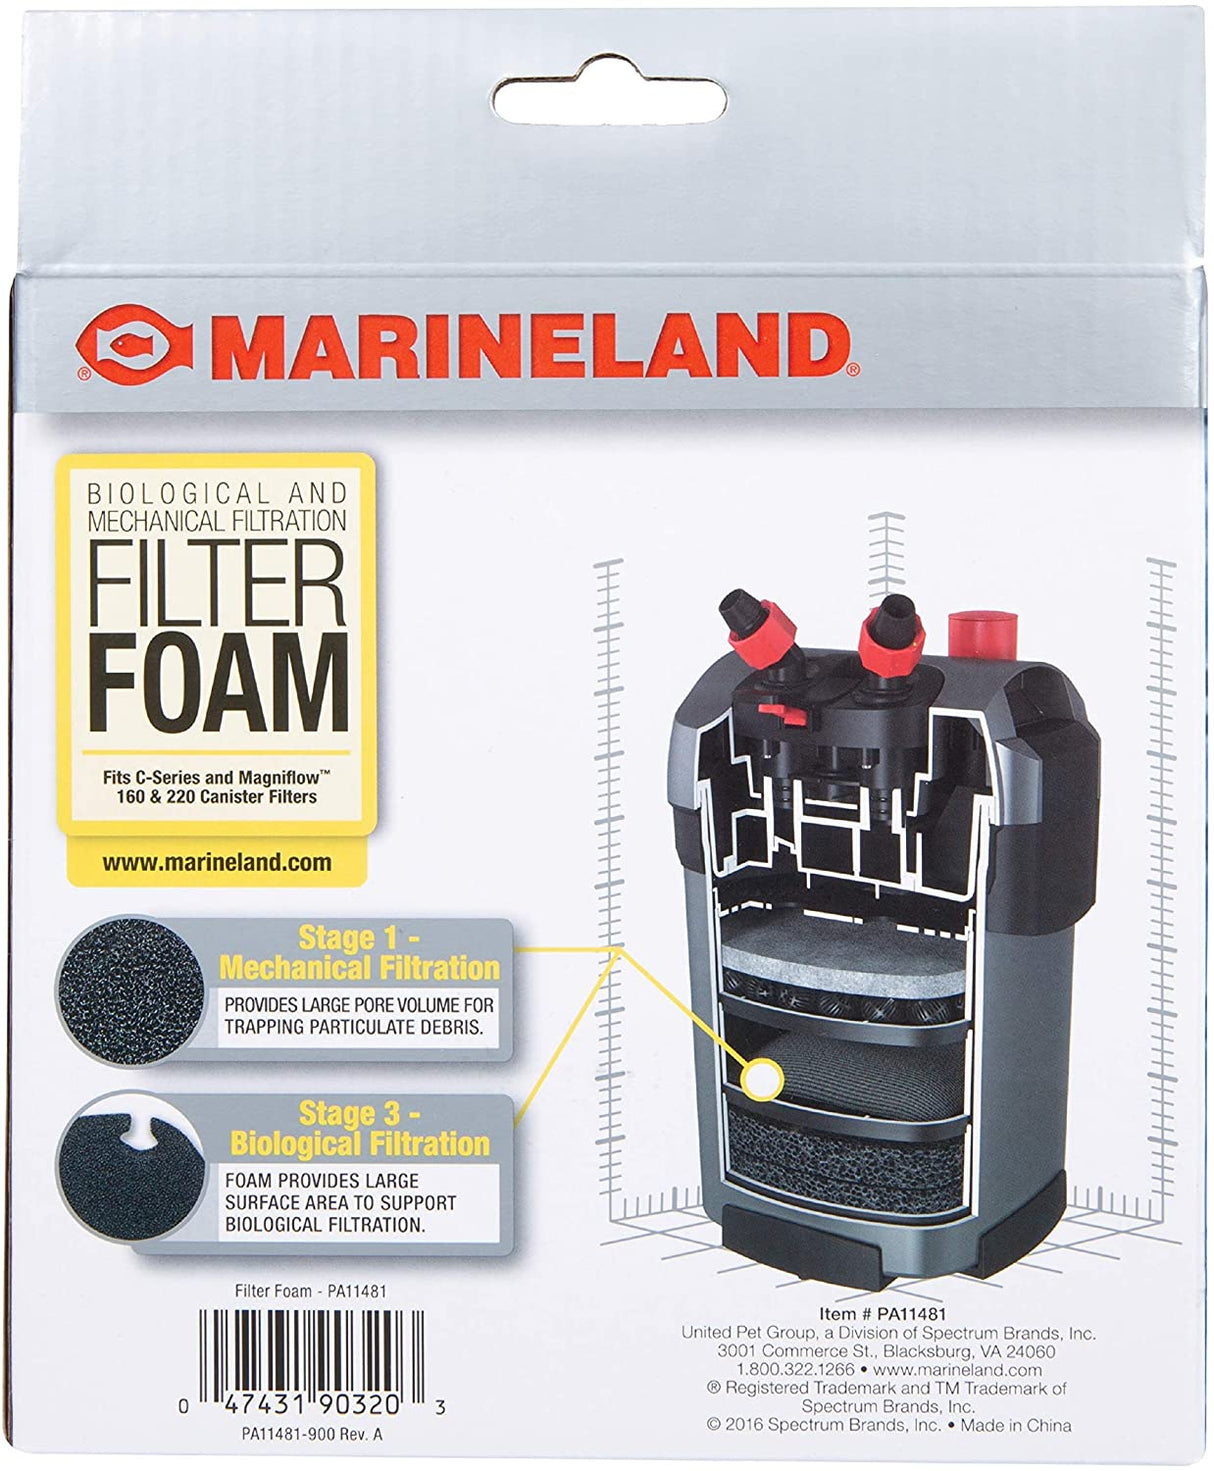 2 count Marineland Rite Size S Filter Foam for Magniflow and C-Series Filters